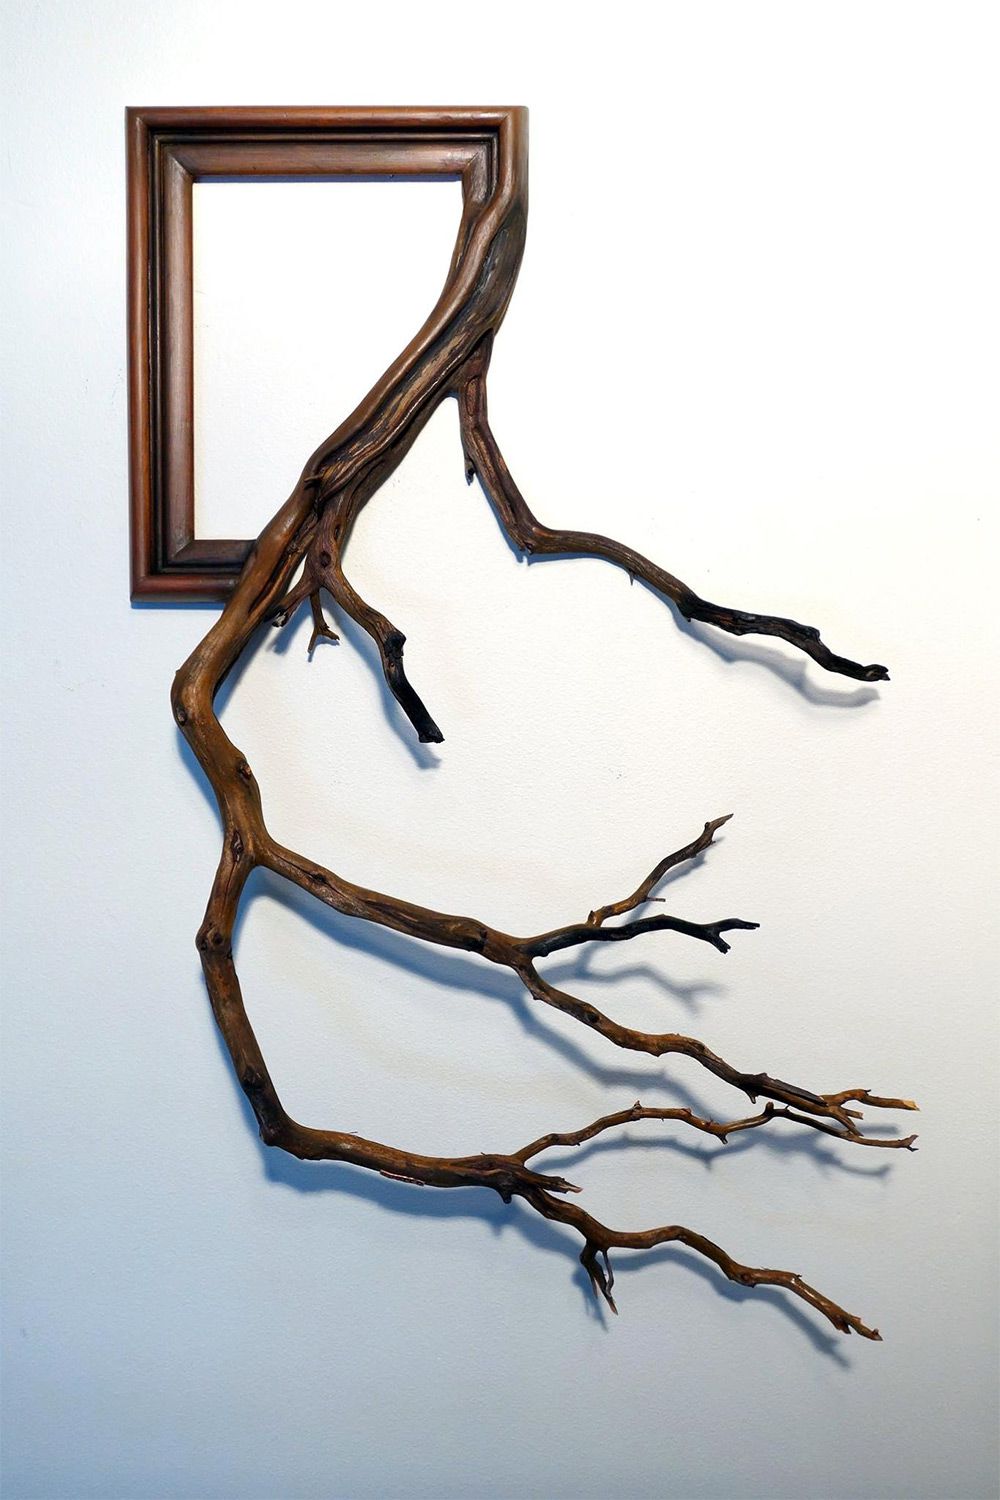 Tree Roots And Branches Fused With Ornate Picture Frames By Darryl Cox 5